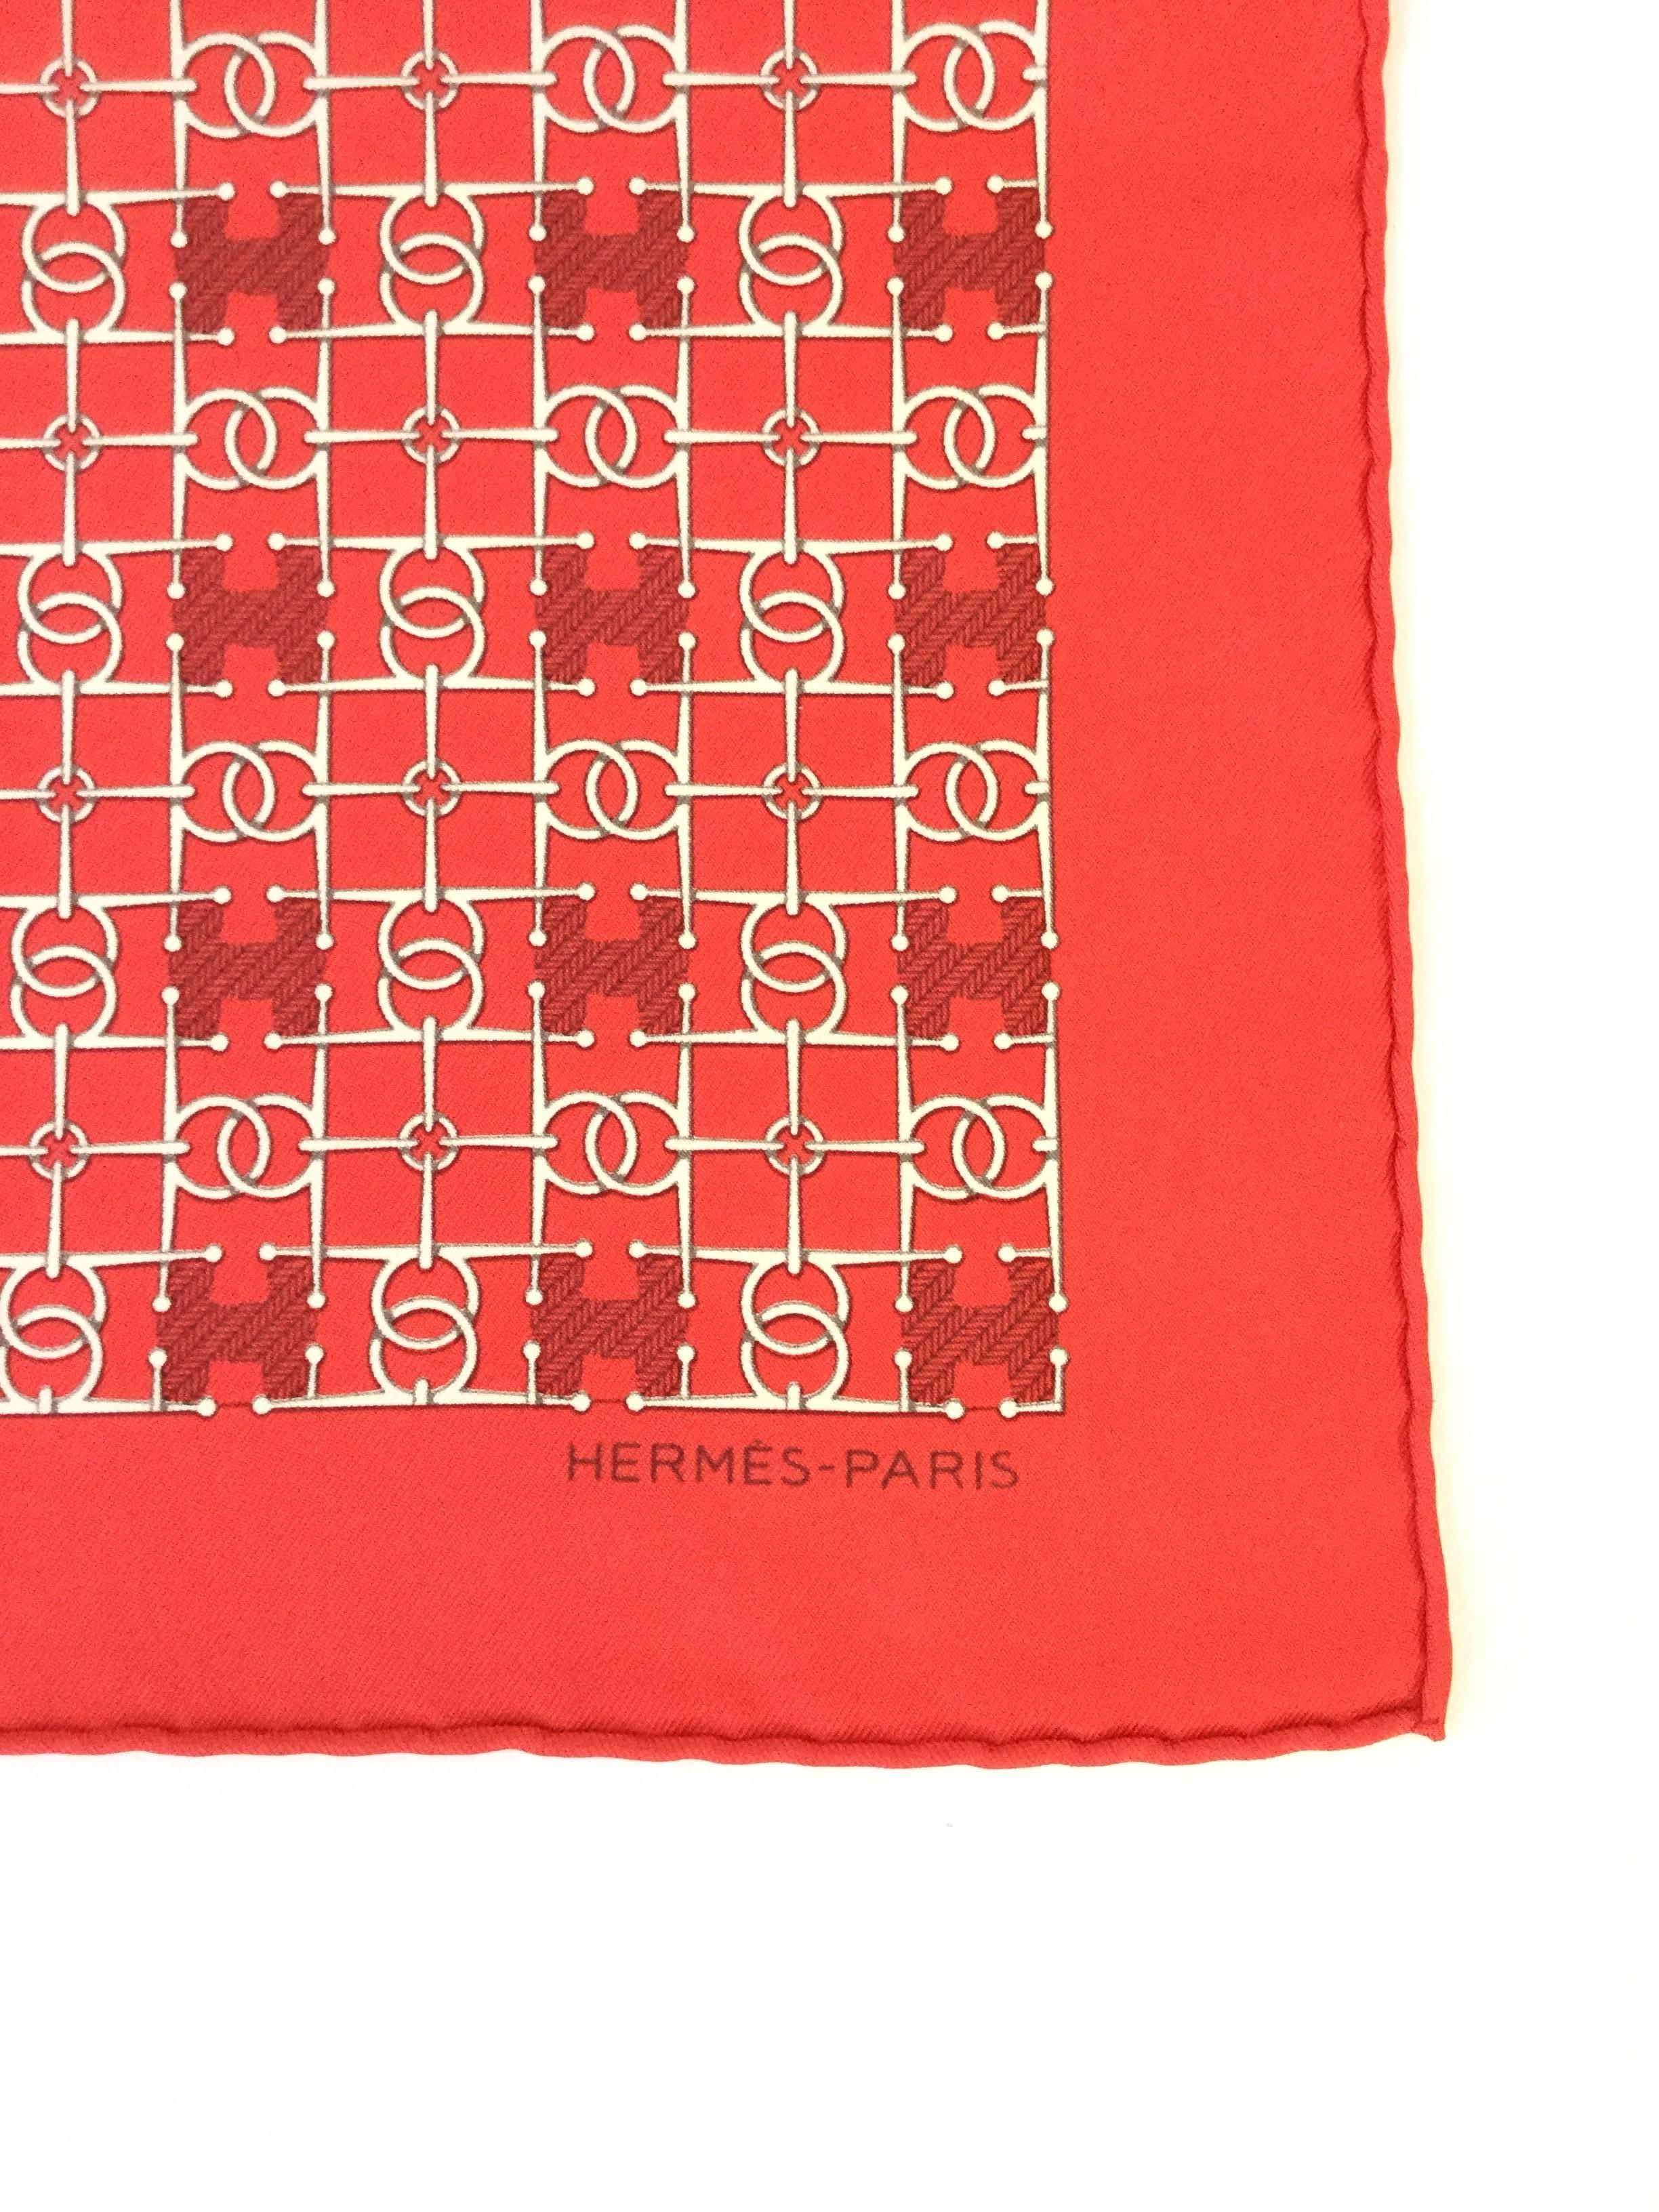 
Understated and elegant silk scarf by Hermès. The scarf feature a repetitive loose ring and Hermès 